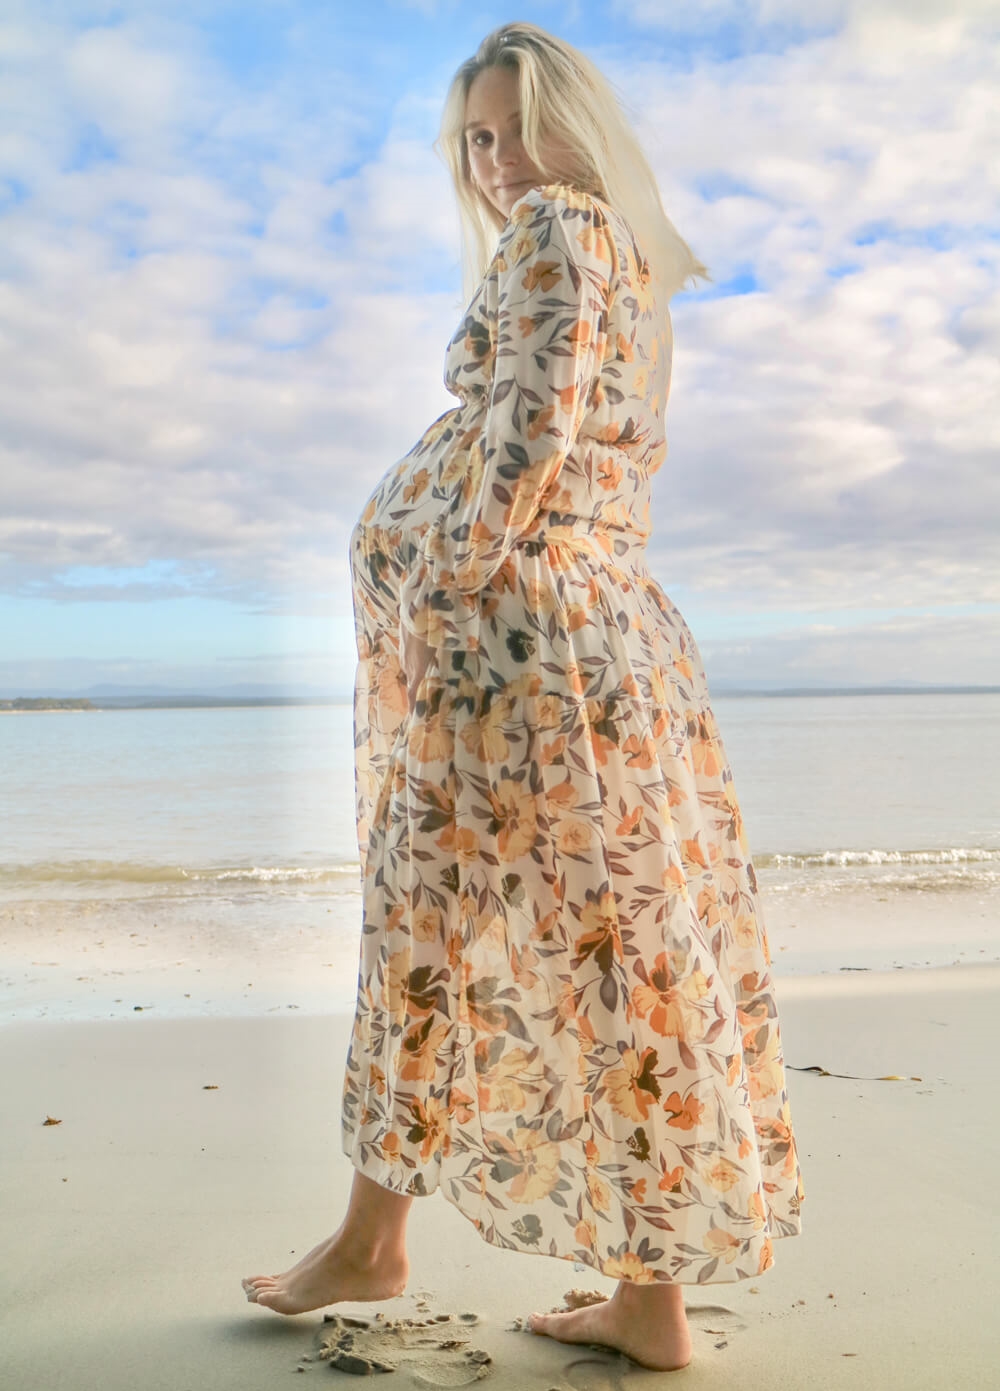 Lait & Co - Wanderlust Maternity Maxi Gown in Yellow Floral